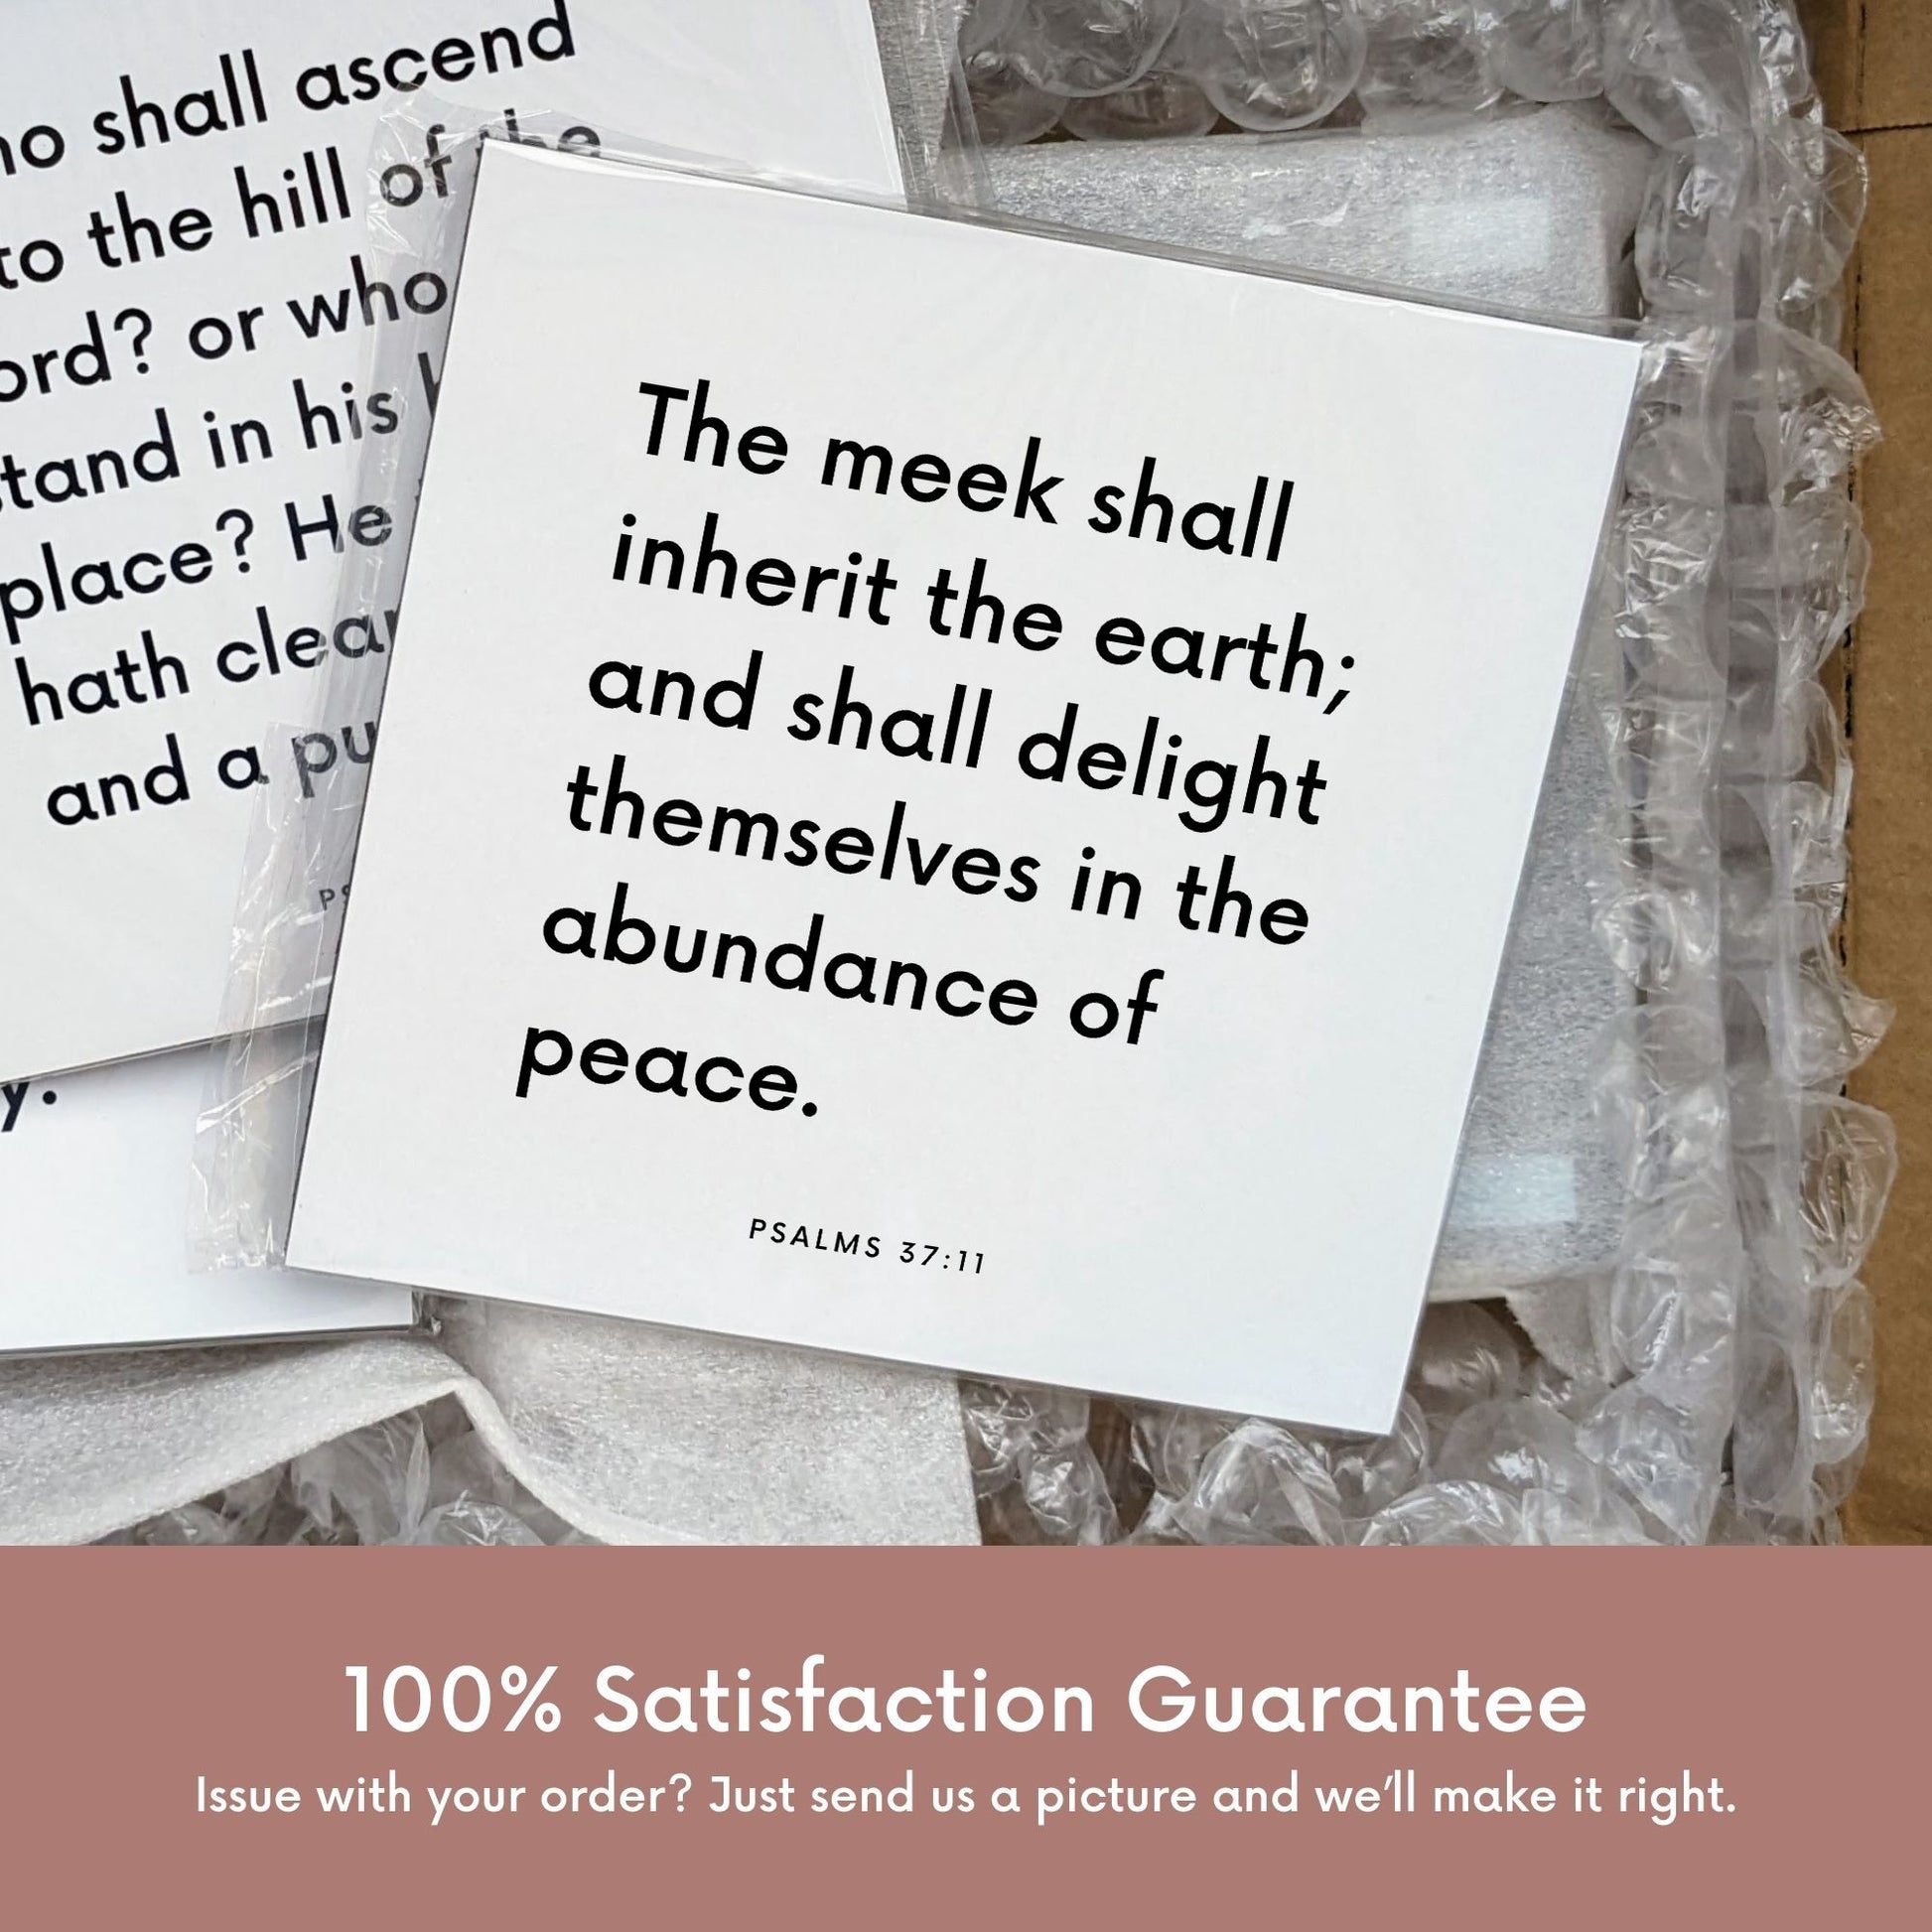 Shipping materials for scripture tile of Psalms 37:11 - "The meek shall inherit the earth"